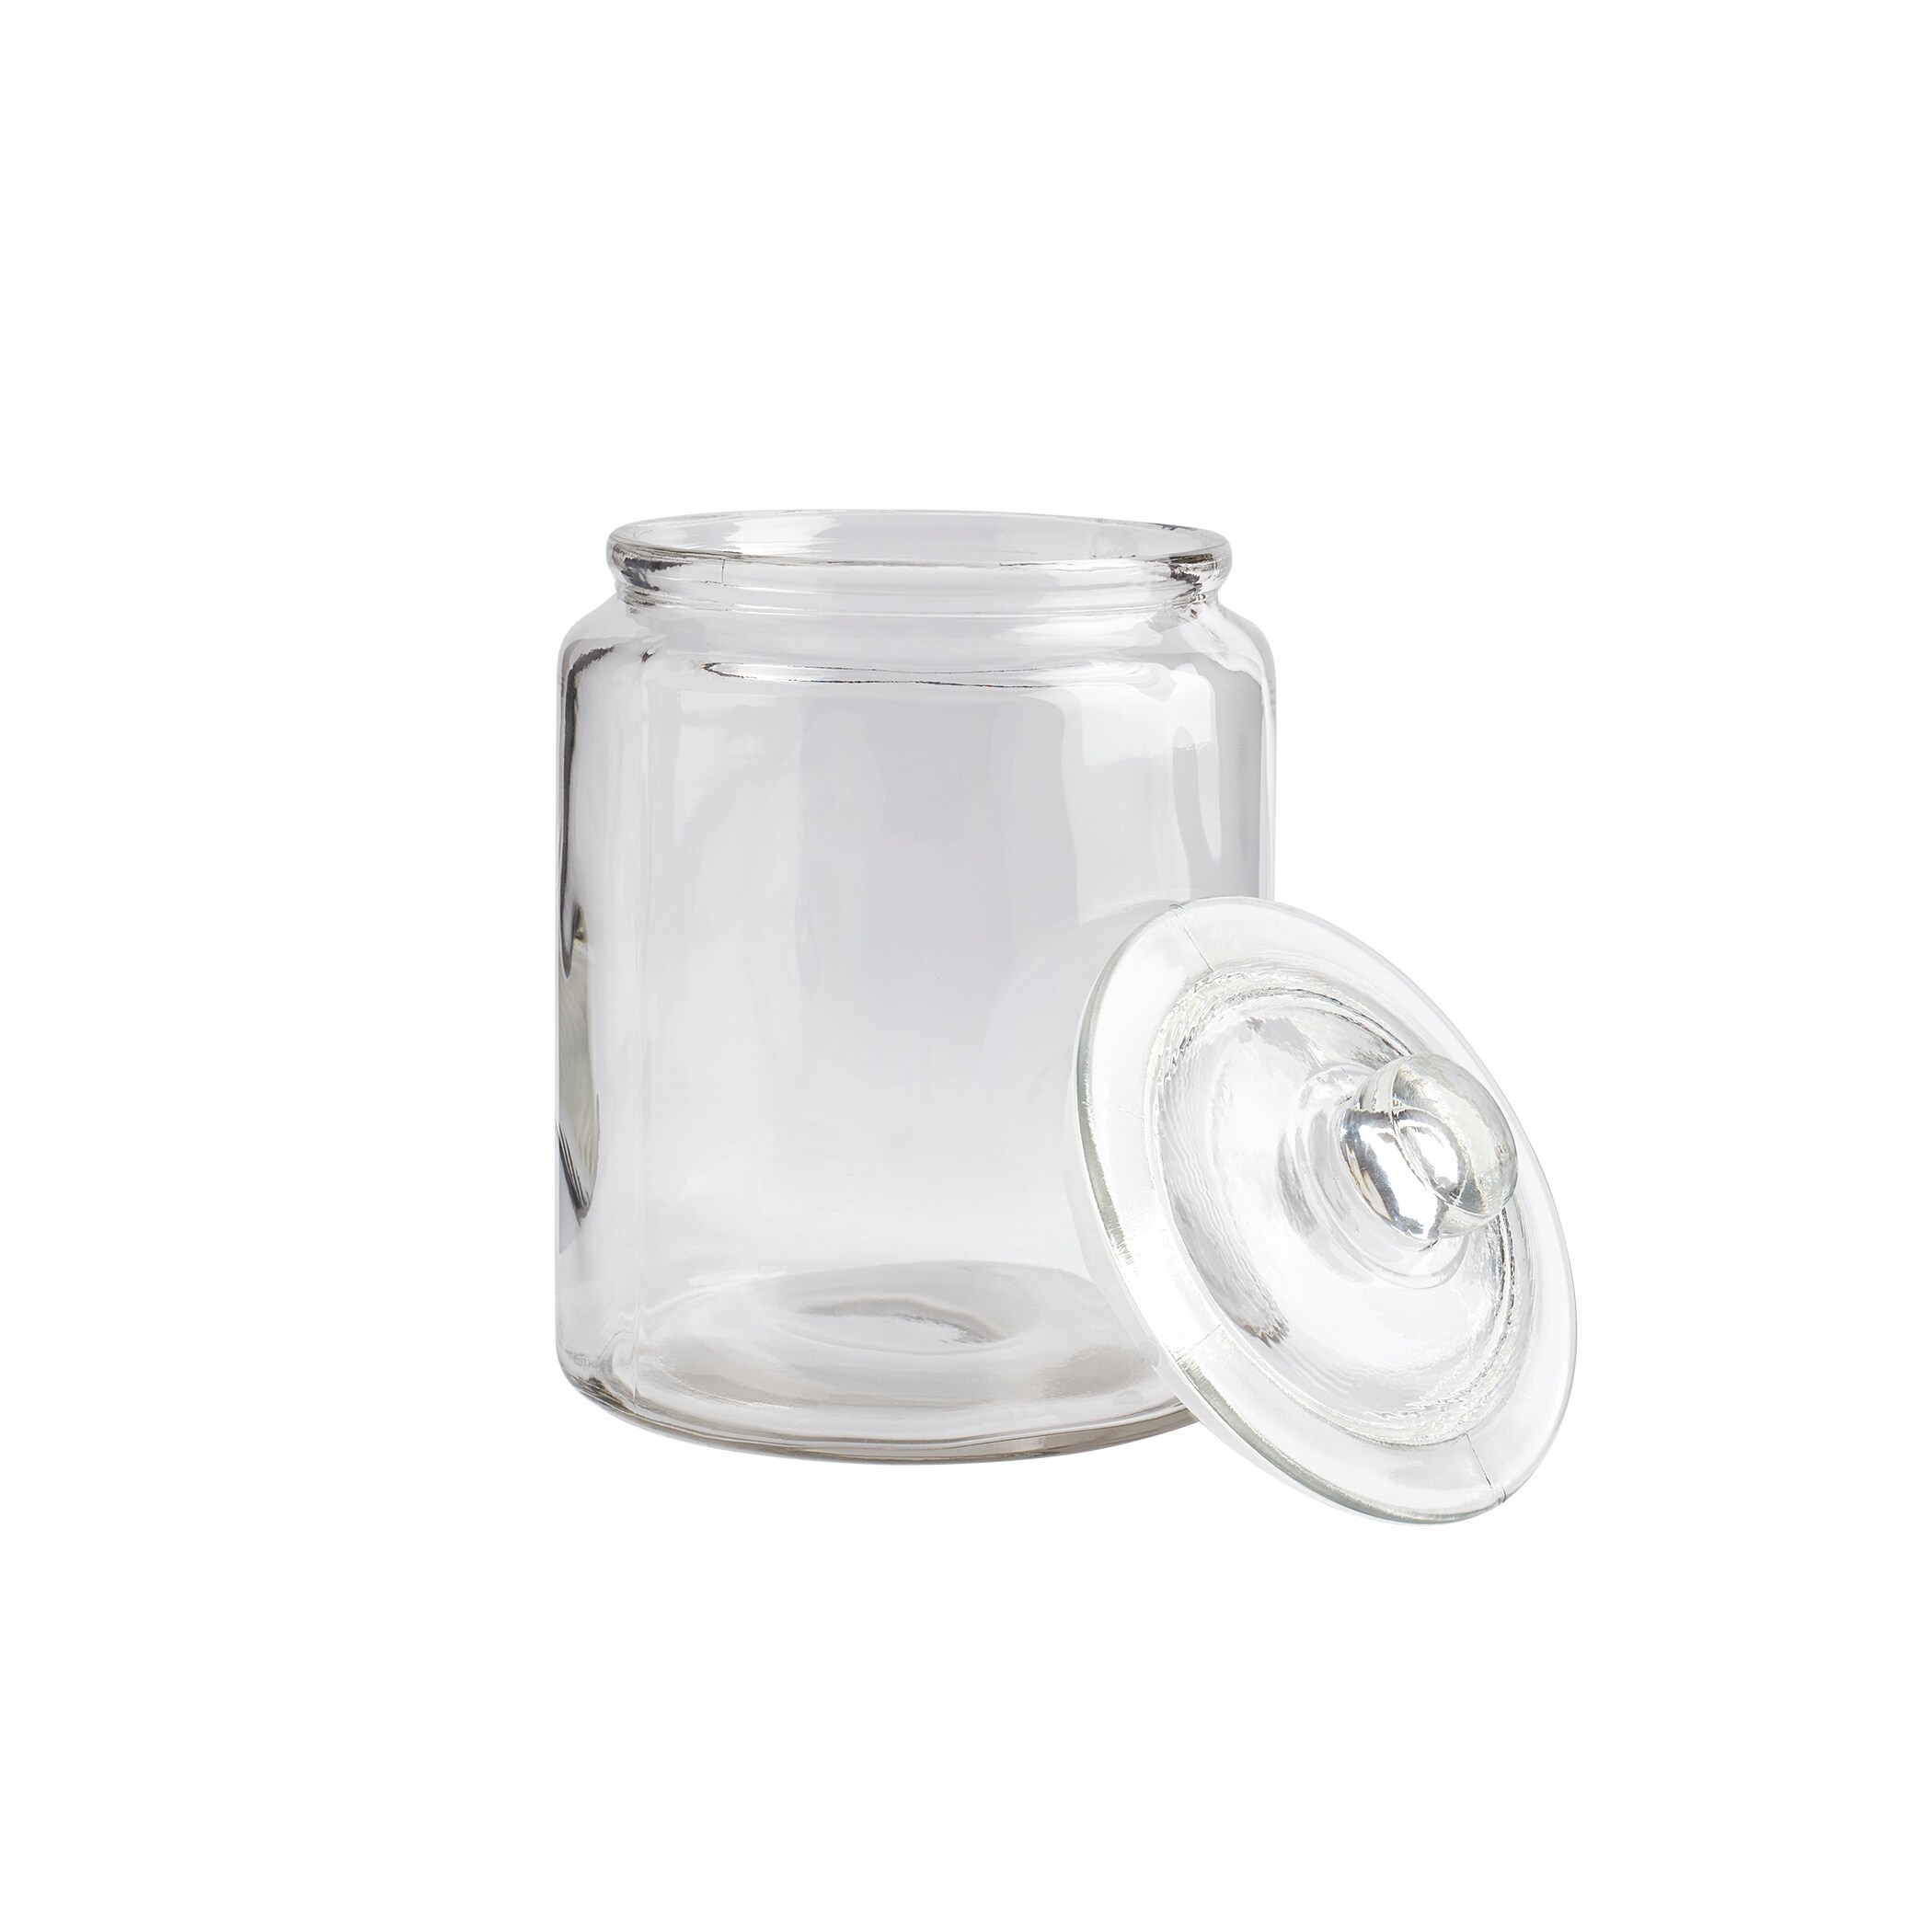 https://ak1.ostkcdn.com/images/products/is/images/direct/7c1ef7fb6da46c80ff285170c8e00f2ae13b431e/Mason-Craft-%26-More-Apothecary-Clear-Glass-Jars-w--Glass-Lids---Set-of-2.jpg